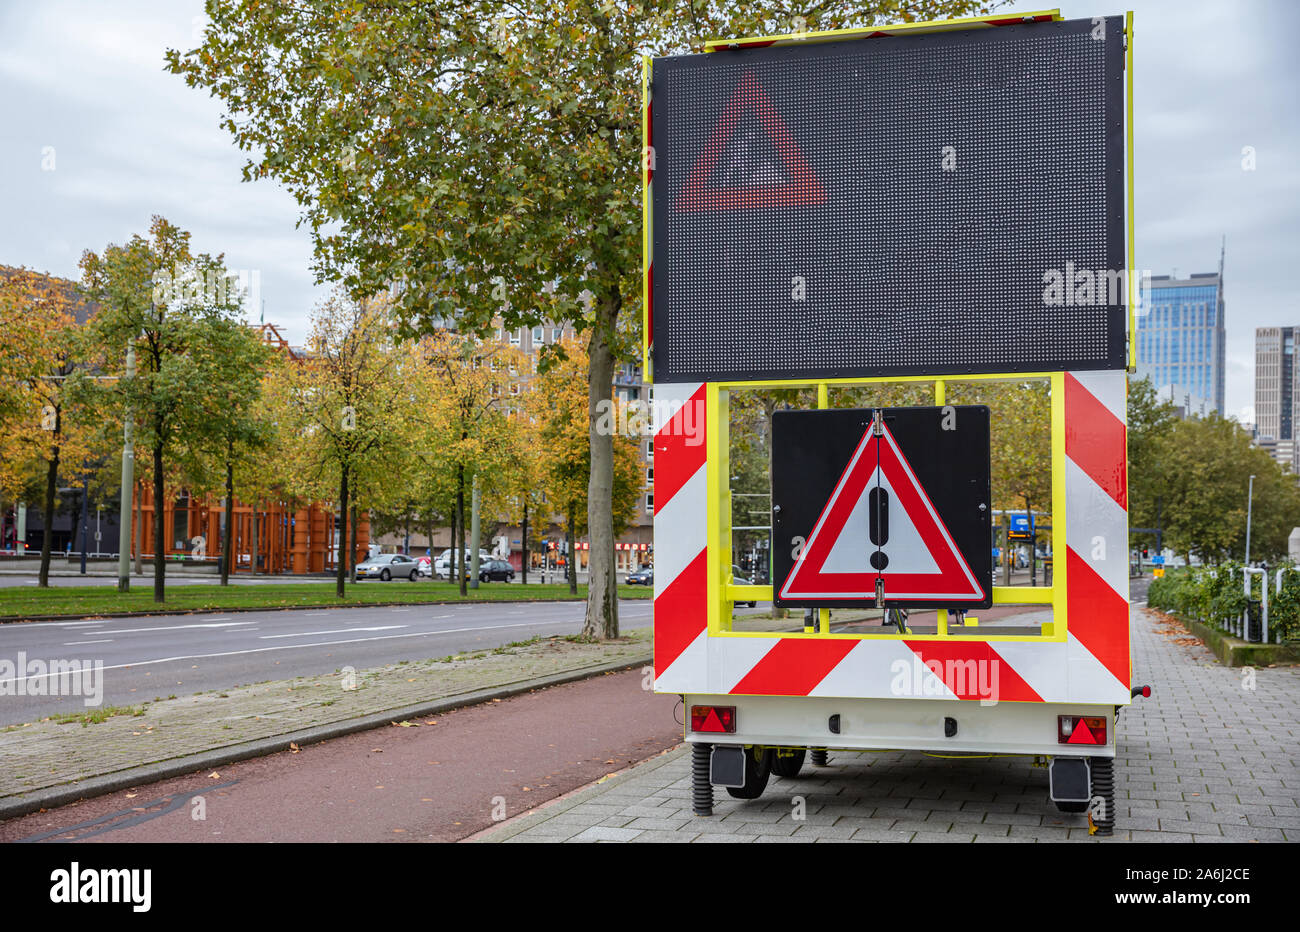 Roadworks warning signage, led lights board and danger exclamation sign on a trailer the city center, cloudy autumn day Stock Photo Alamy